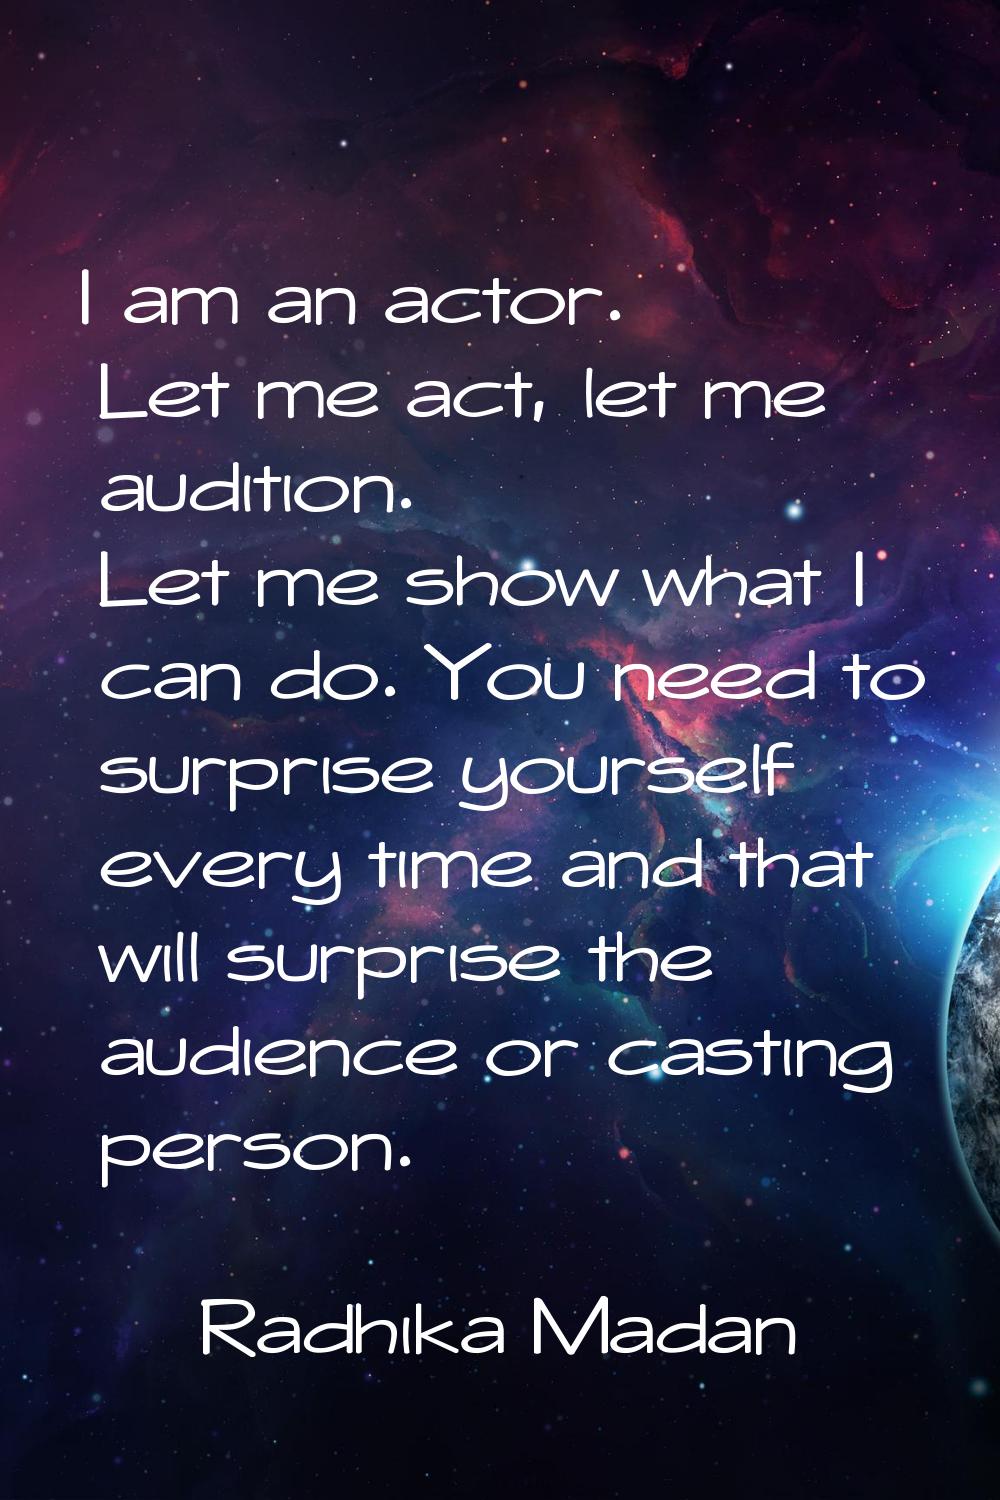 I am an actor. Let me act, let me audition. Let me show what I can do. You need to surprise yoursel